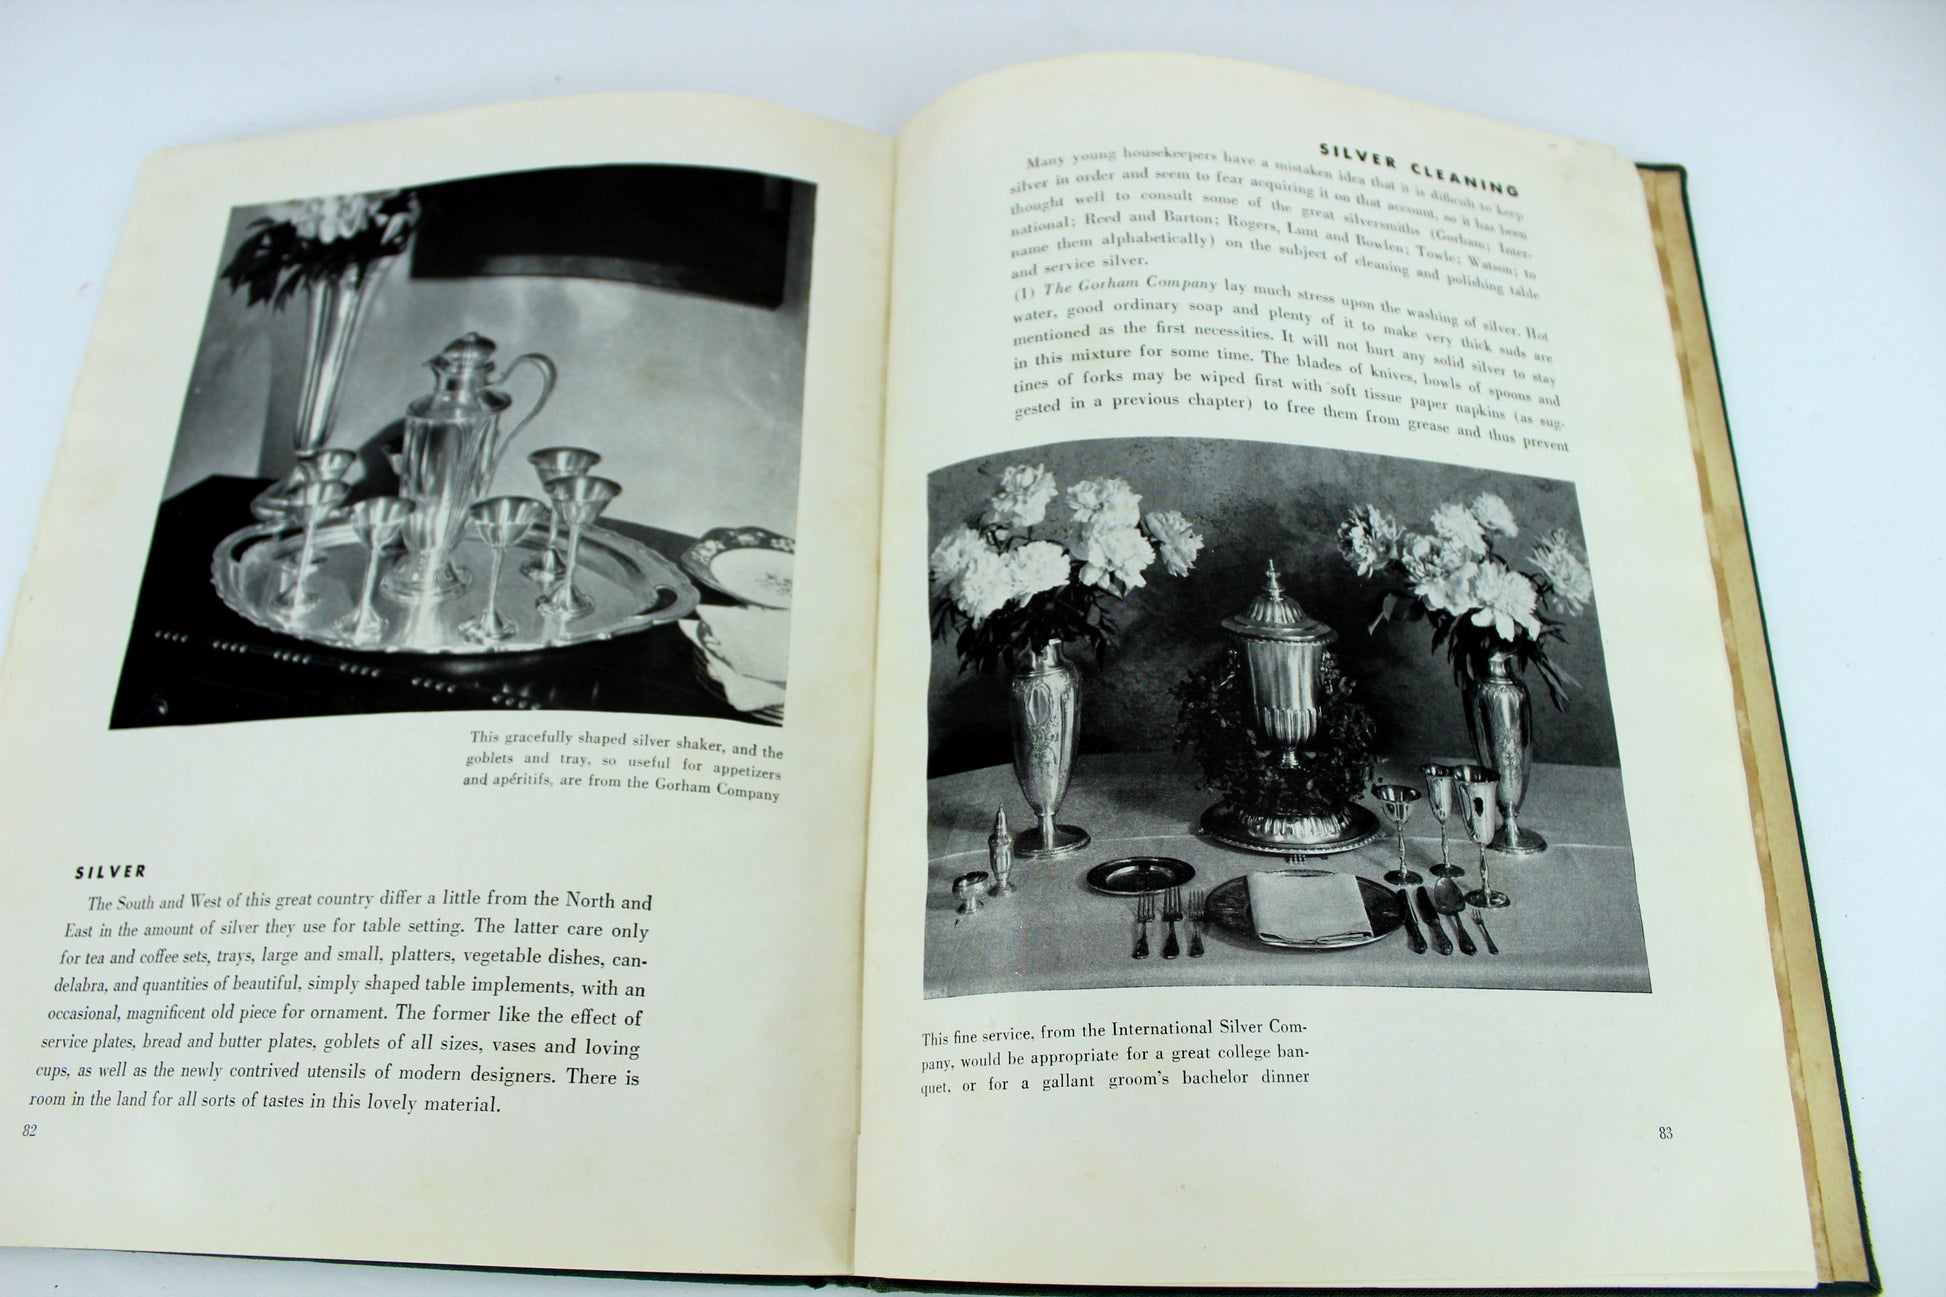 Antique 1930 Conde Nast Vogue's Book of Smart Service Butler Chauffeur Dress Silver Table Service cleaning sterling